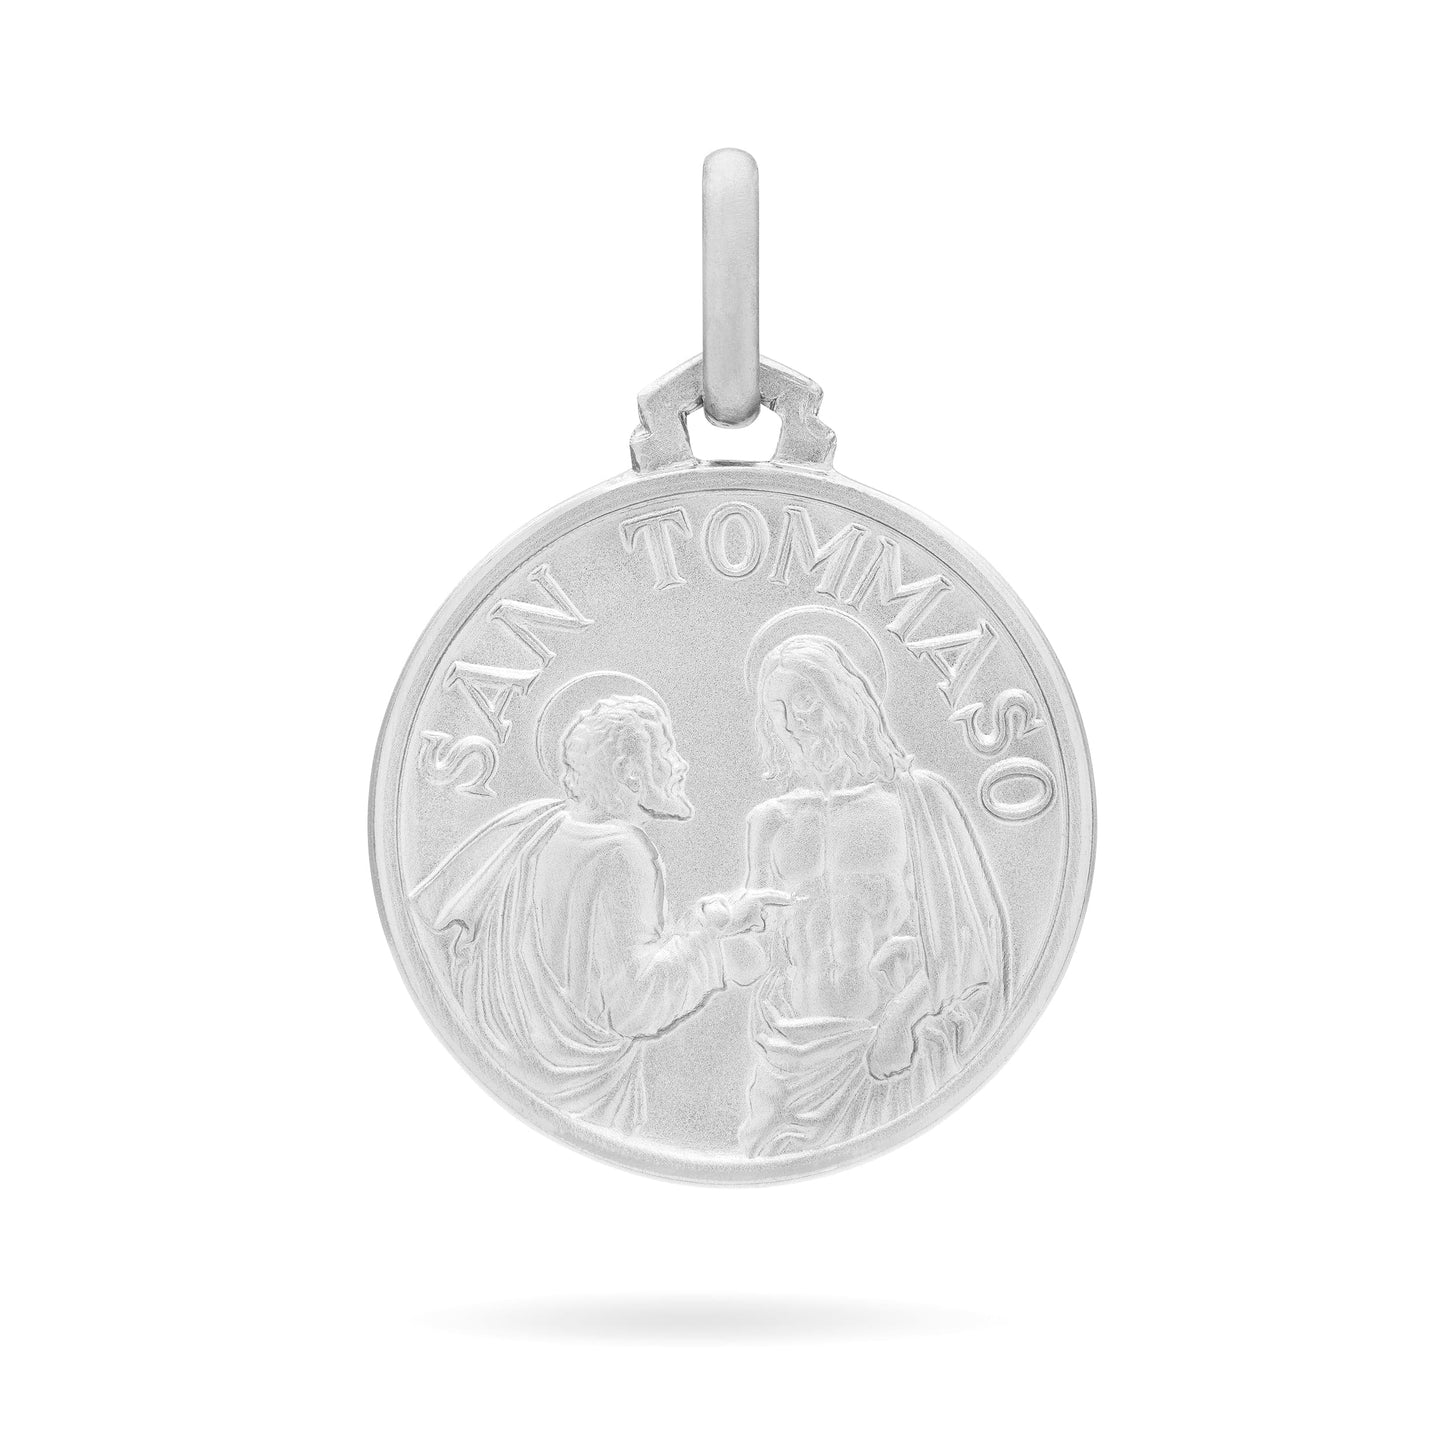 MONDO CATTOLICO Medal 10 mm (0.39 in) Sterling Silver medal of Saint Thomas